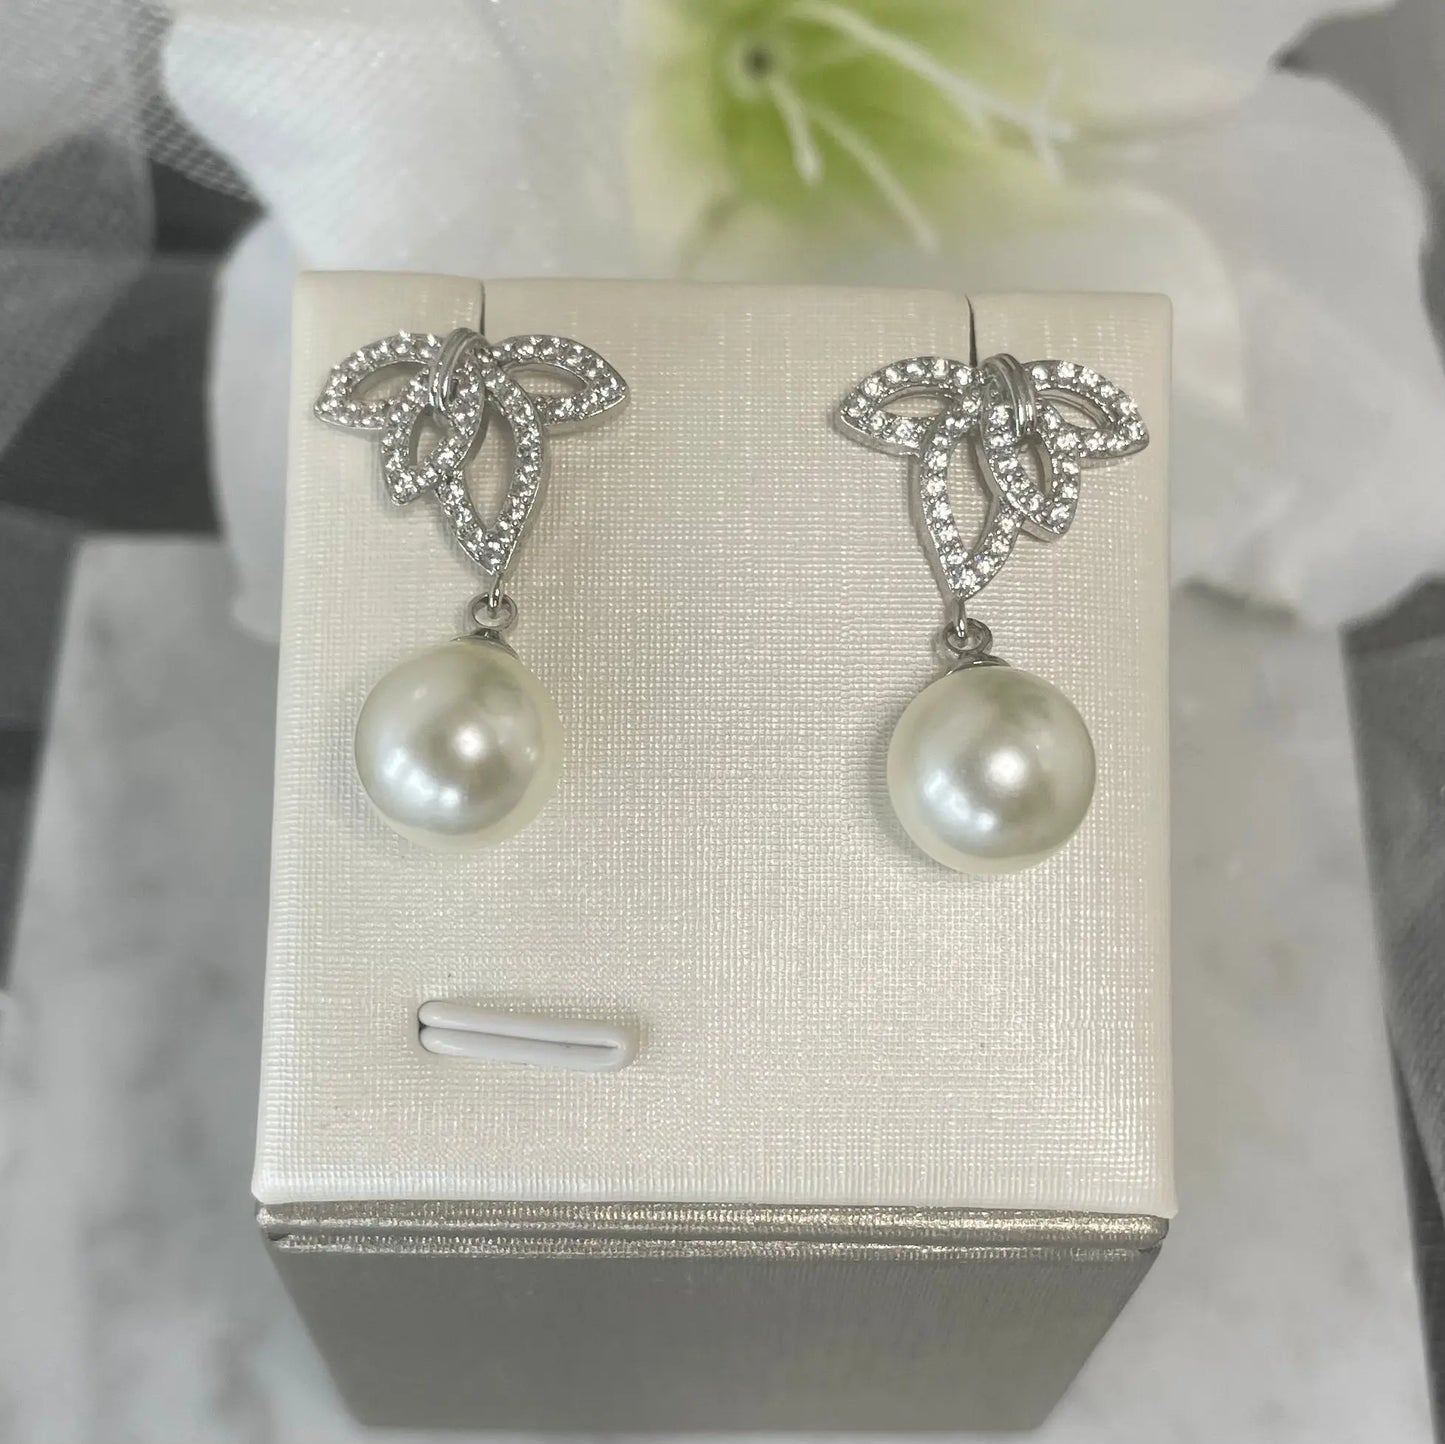 Belmont crystal pearl earrings with leaf design, varied crystal sizes, and a unique central hole, culminating in a classic pearl drop, ideal for bridal elegance.